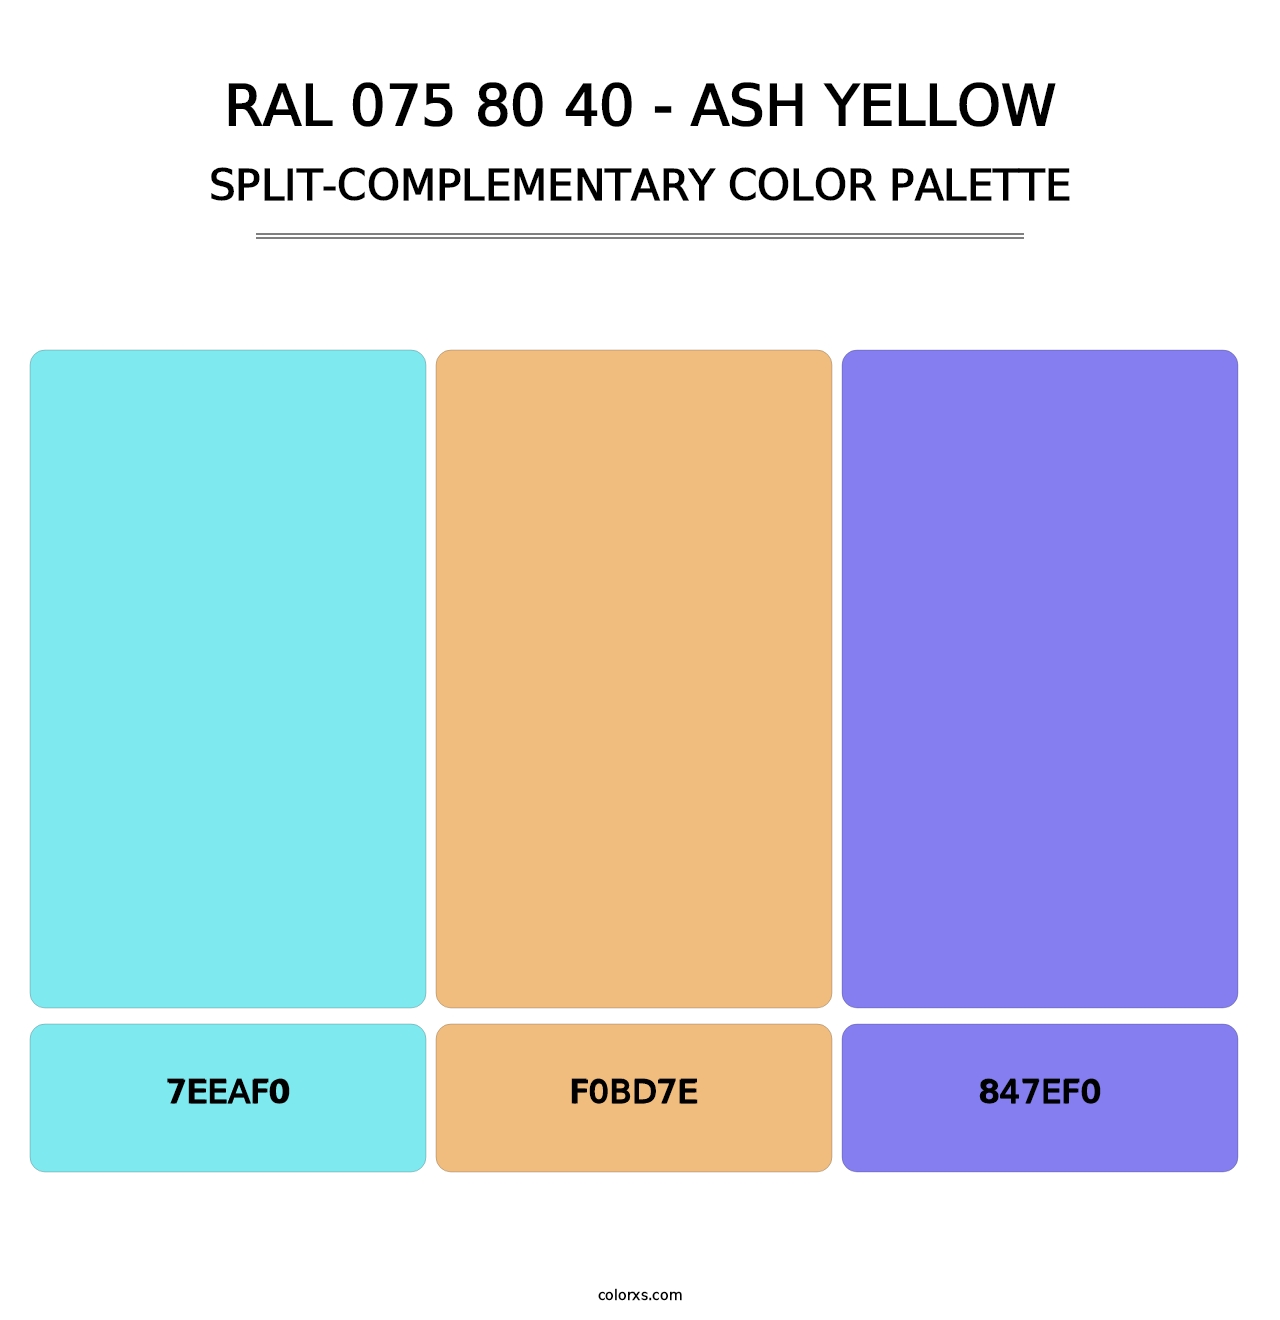 RAL 075 80 40 - Ash Yellow - Split-Complementary Color Palette